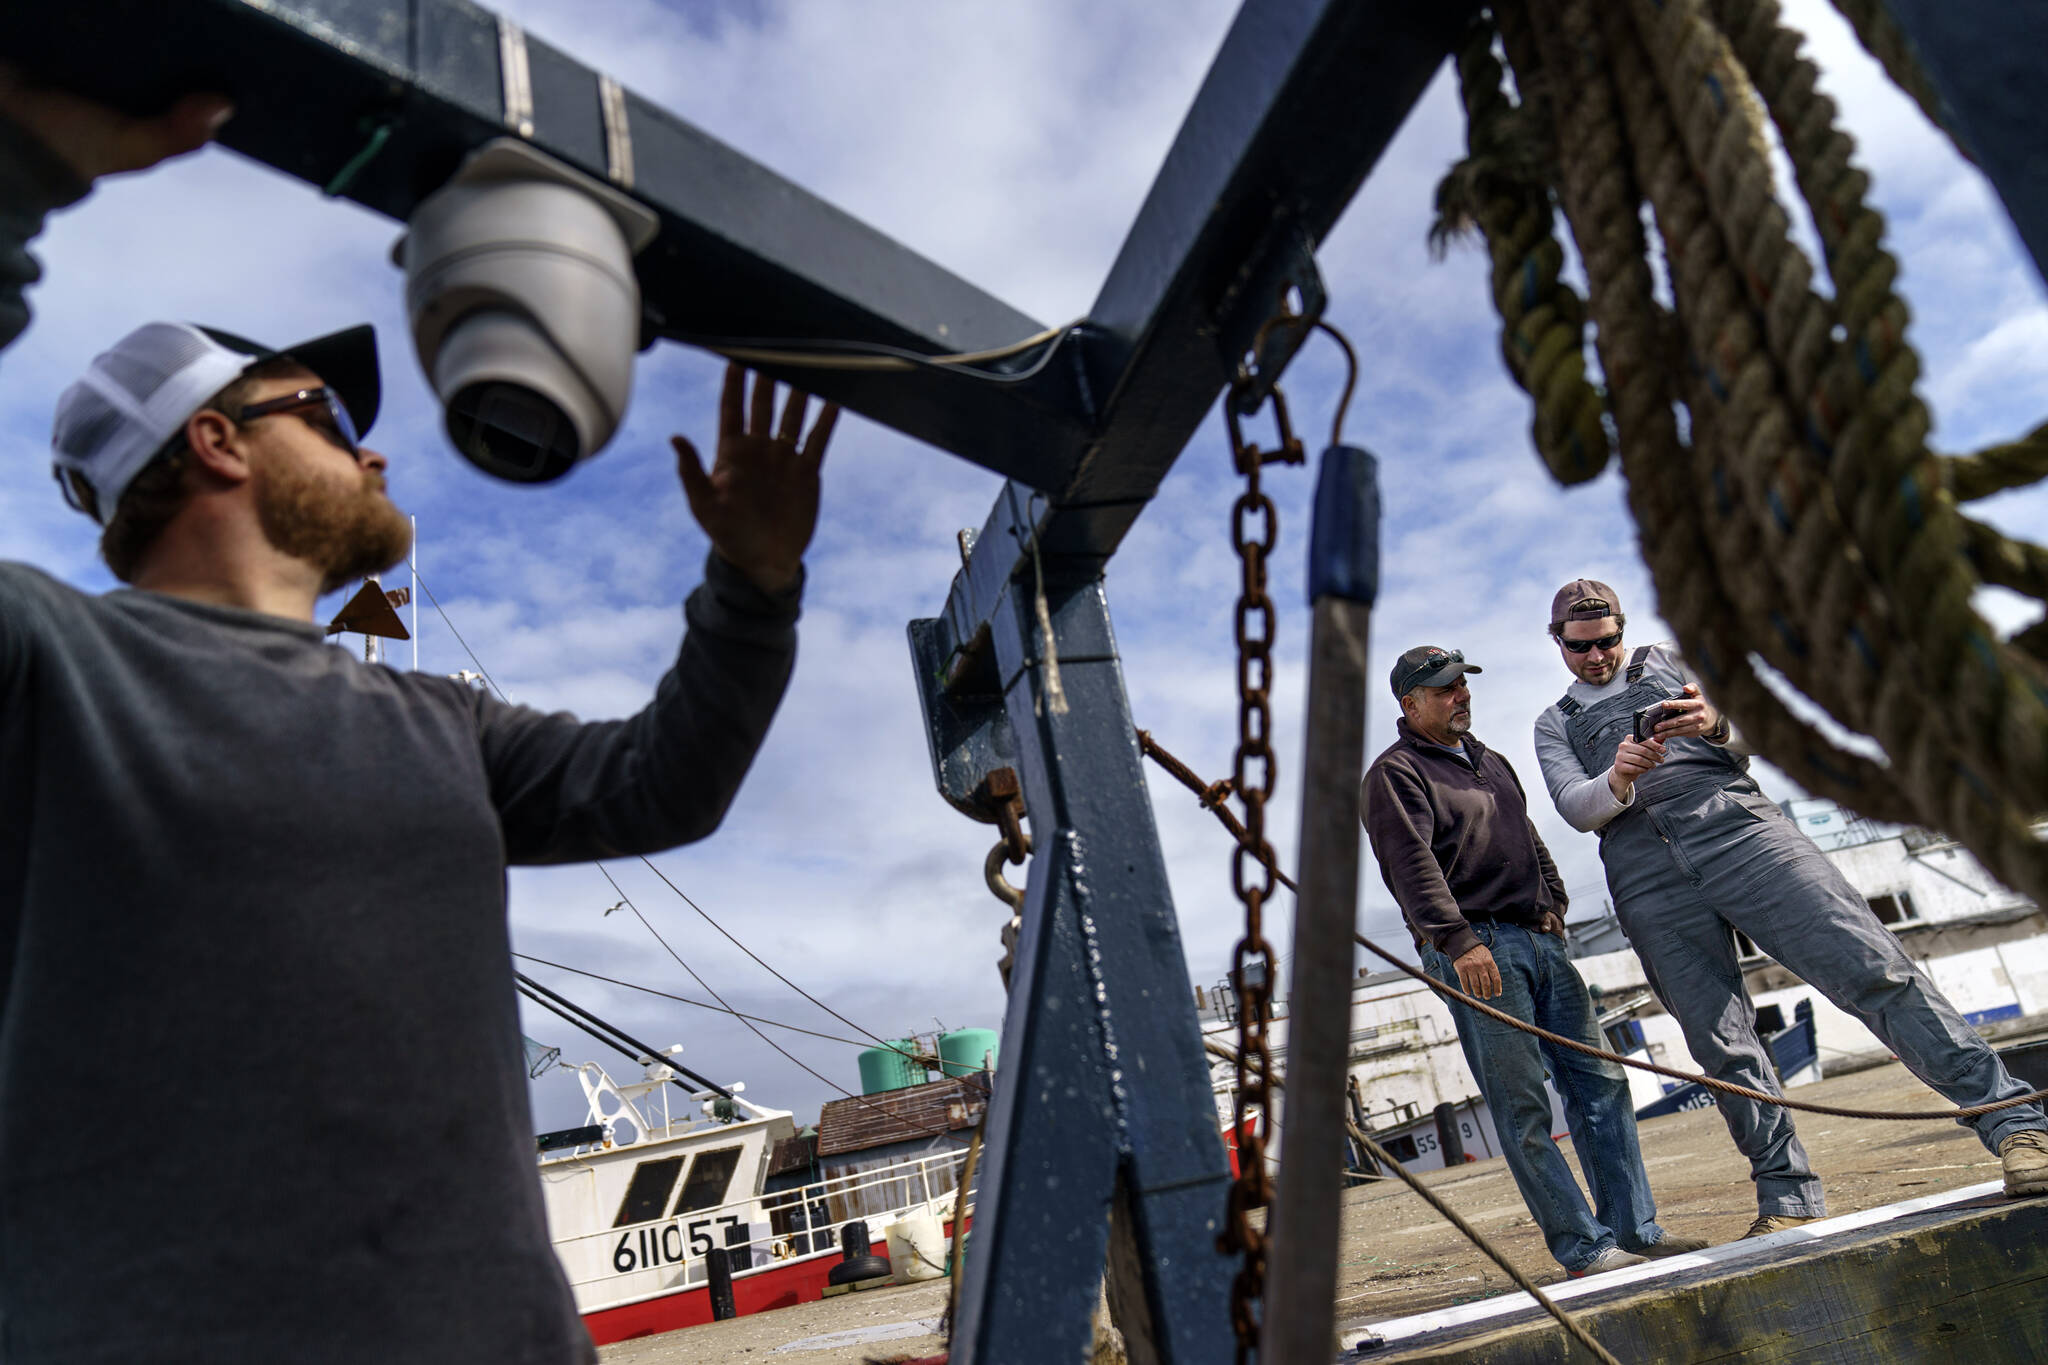 Mark Hager, left, positions a camera with the help of Anthony Lucia, right, as captain Al Cottone watches the feed on a monitor from his boat, the Sabrina Maria, in Gloucester, Mass., May 11, 2022. Hager’s Maine-based startup, New England Maritime Monitoring, is one of a bevy of companies seeking to help commercial vessels comply with new federal mandates aimed at protecting dwindling fish stocks. But taking the technology overseas, where the vast majority of seafood consumed in the U.S. is caught, is a steep challenge. (AP Photo / David Goldman)